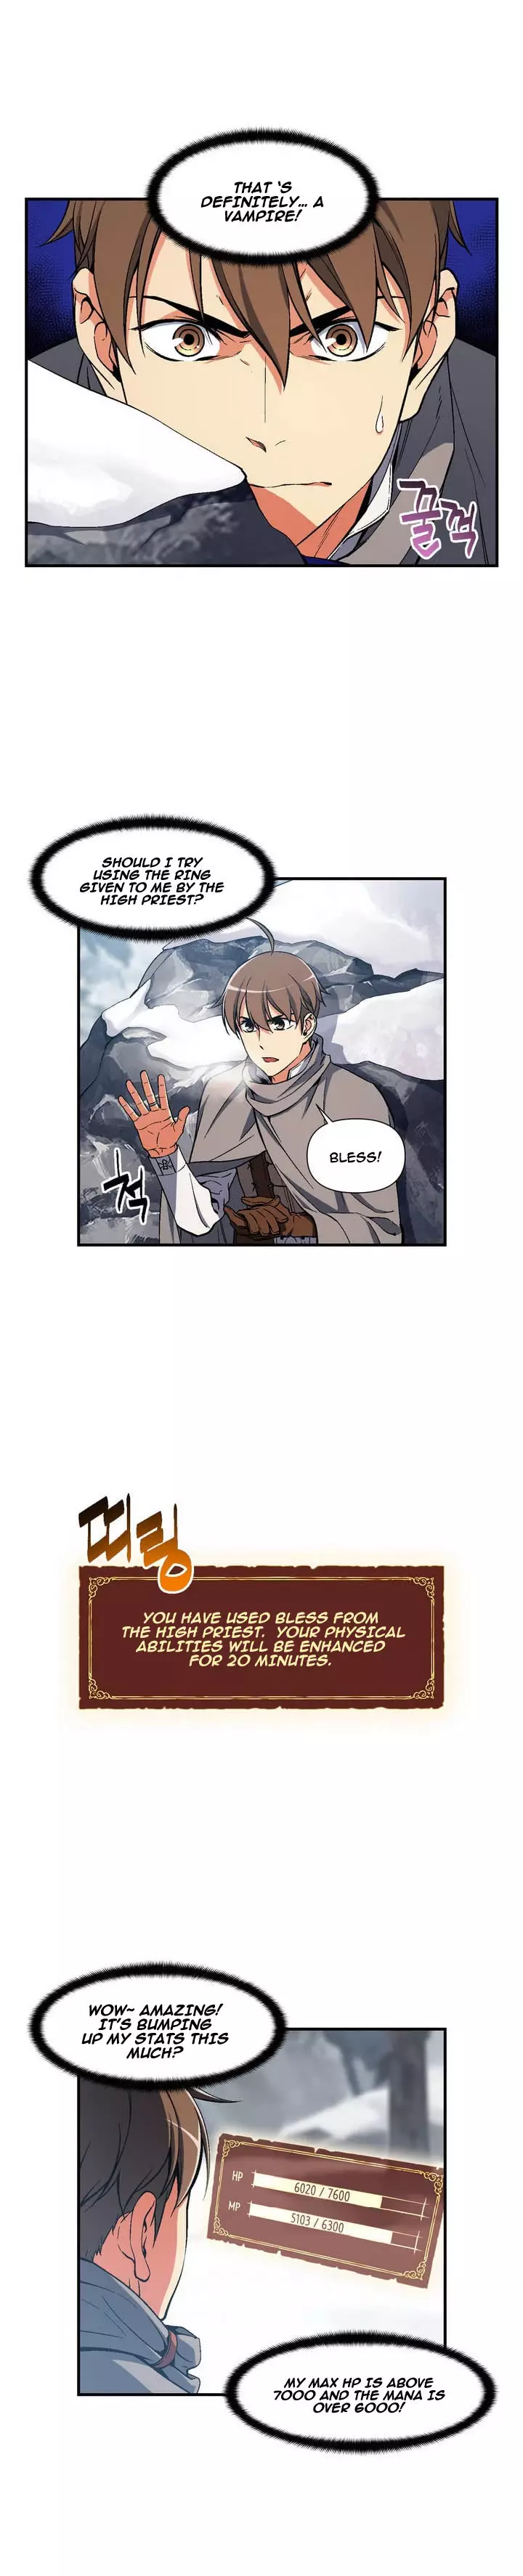 The Legendary Moonlight Sculptor - 74 page 11